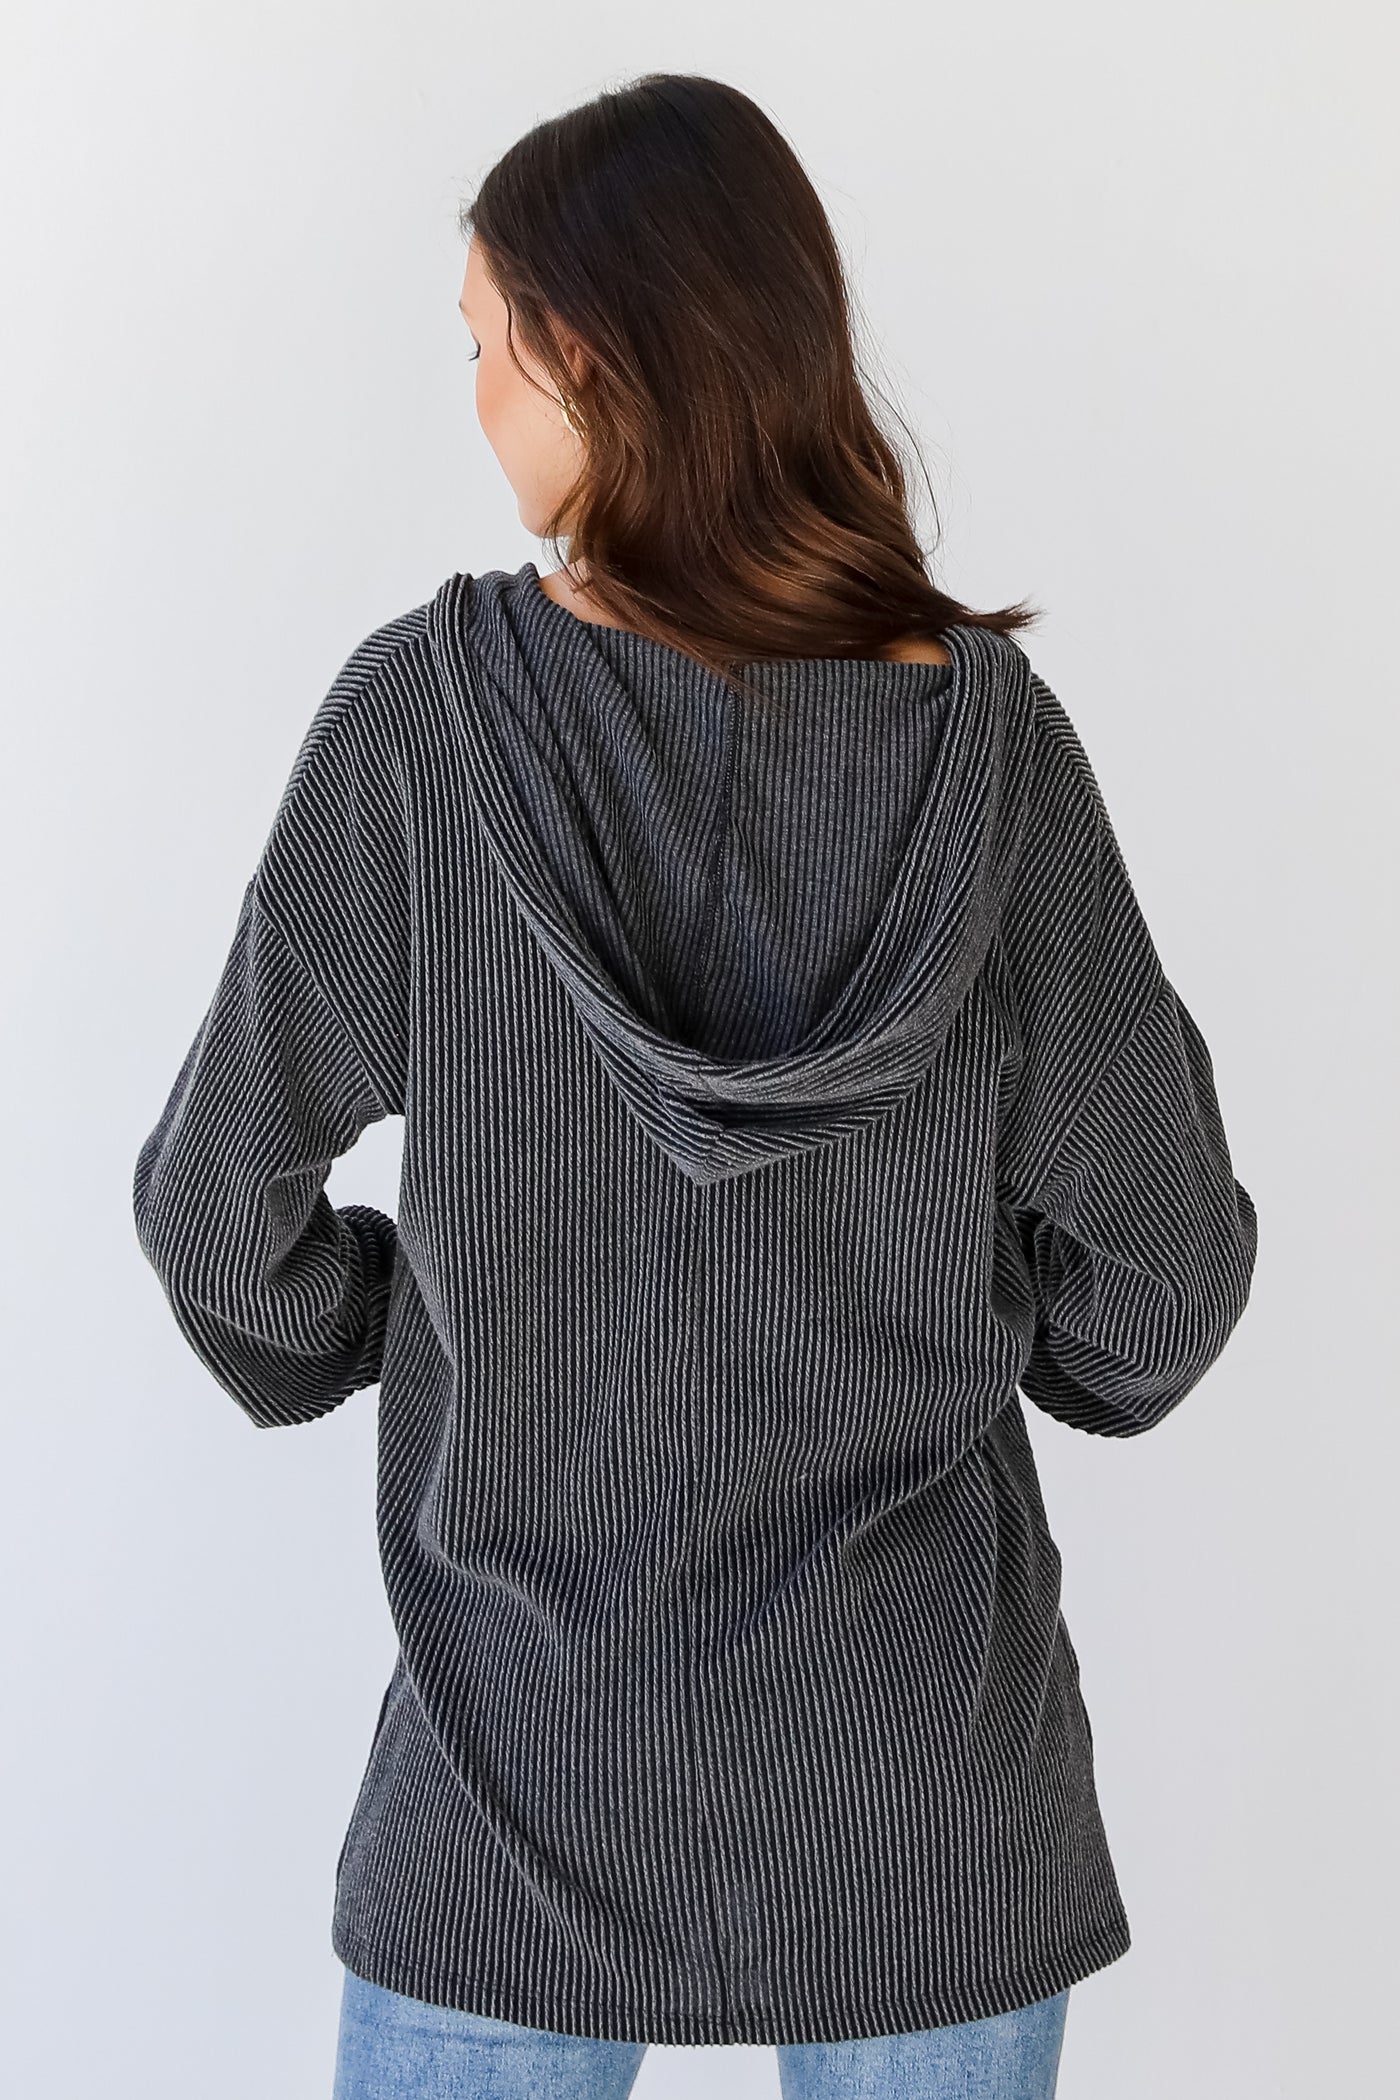 Corded Hoodie in charcoal back view